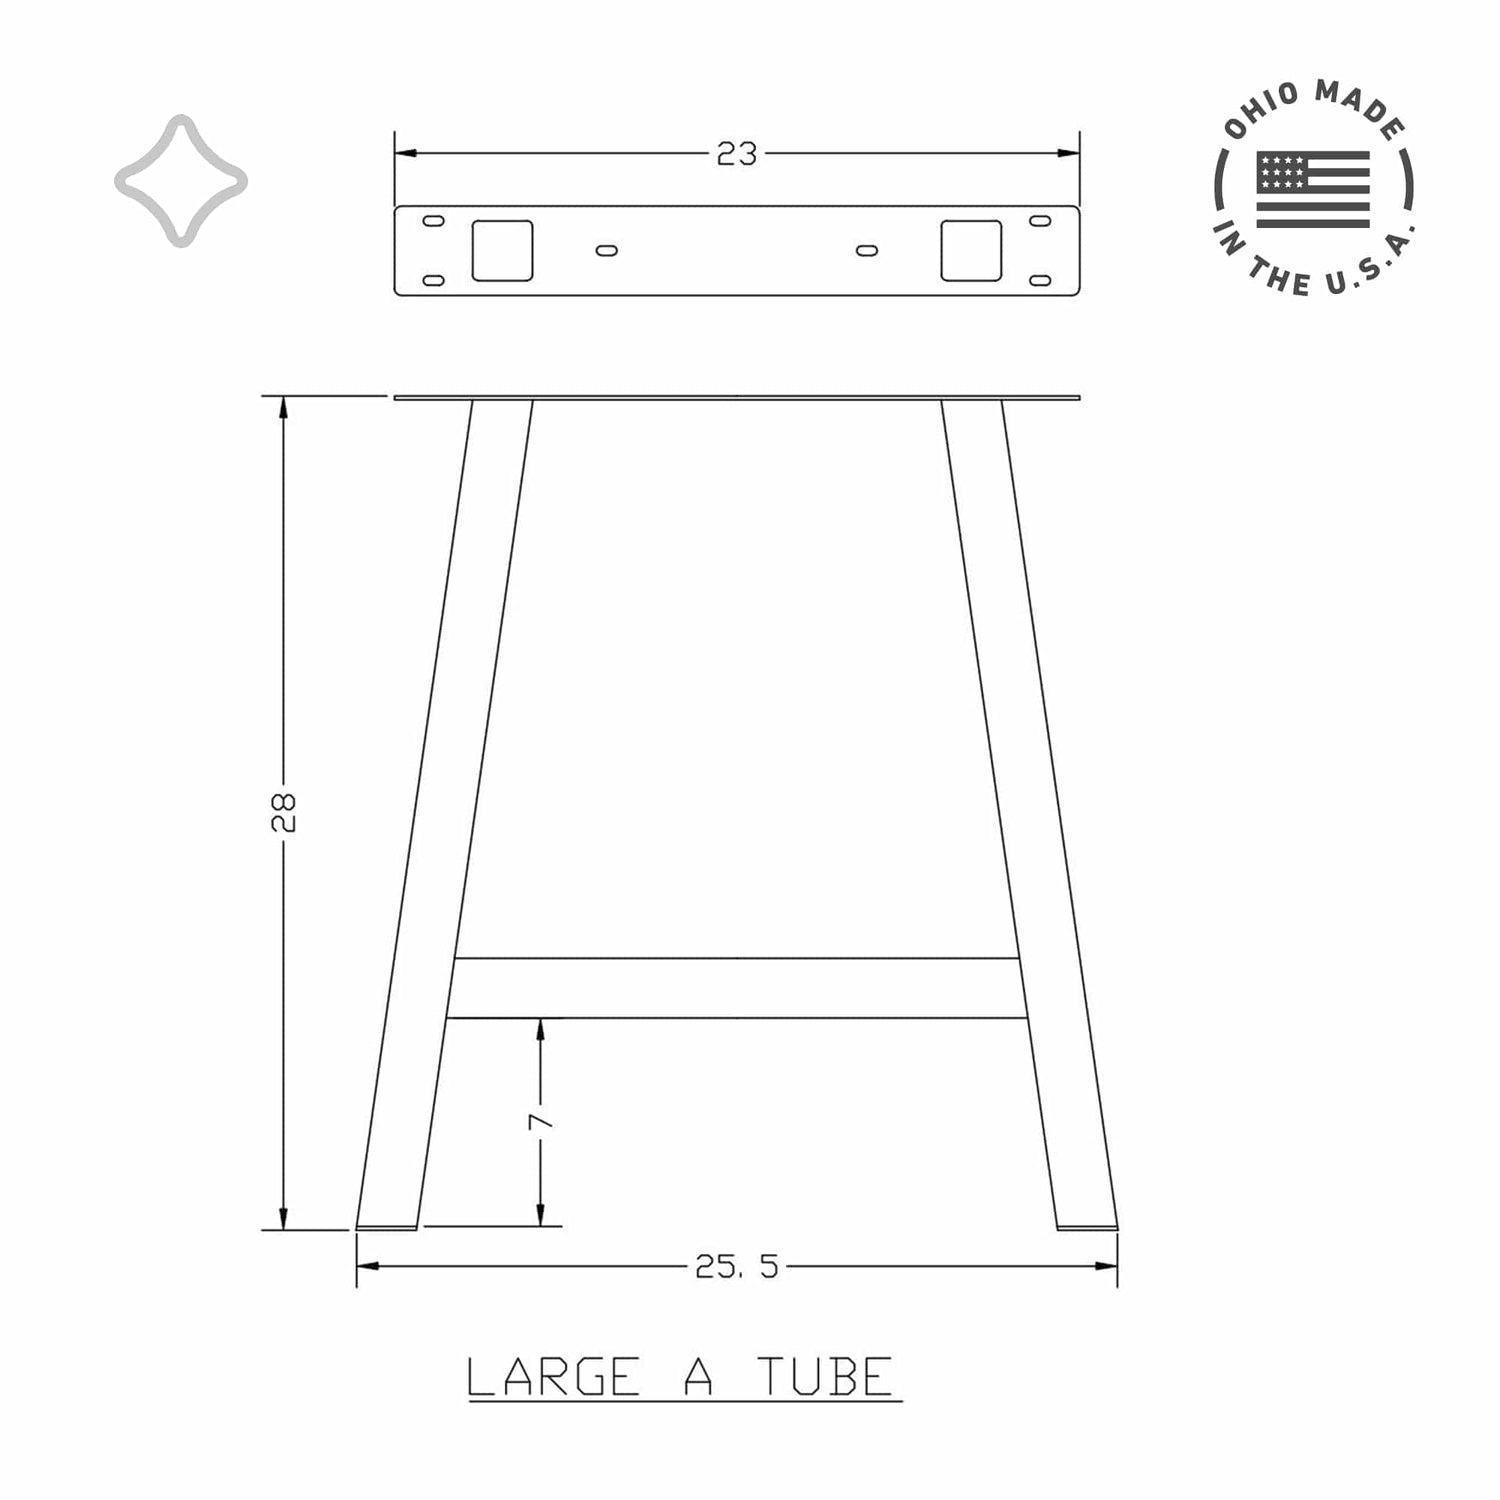 Line drawing of large A-tube. 28 inch tall, 25.5 inch wide at base, 23 inch wide at mounting plate. Cross tube is 7 inches from the floor